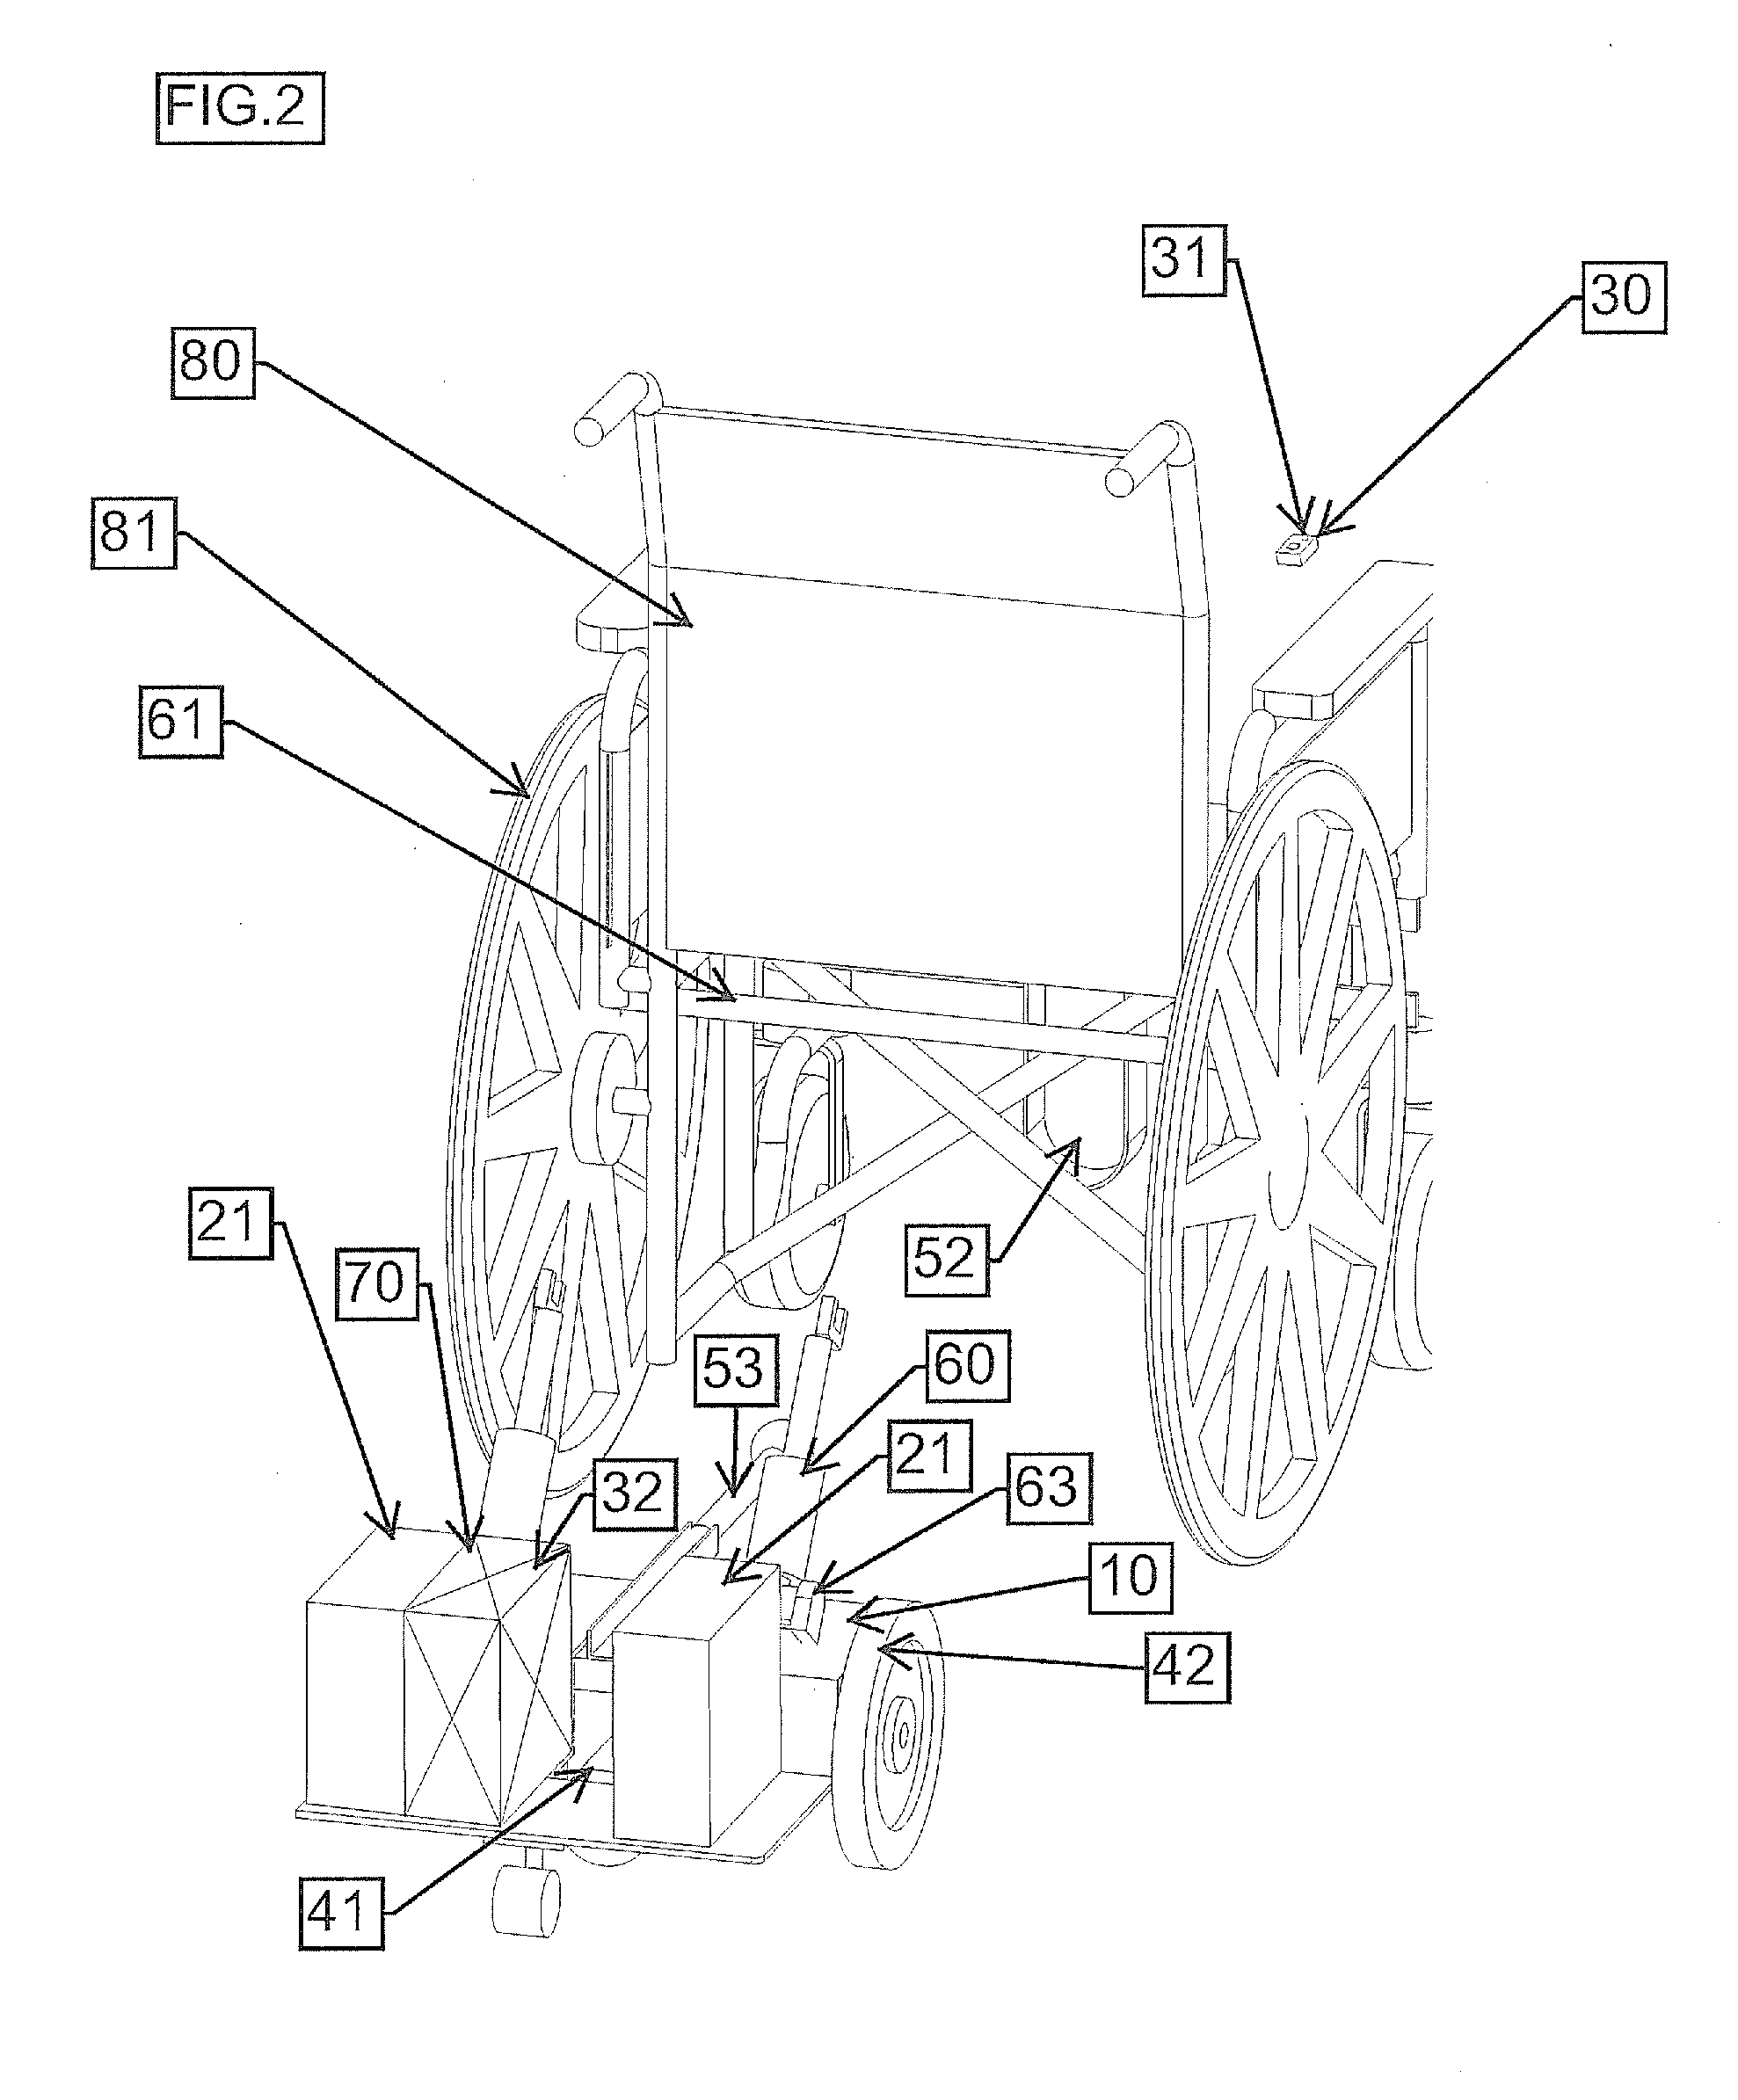 Detachable power drive unit for propelling and steering manual wheelchairs